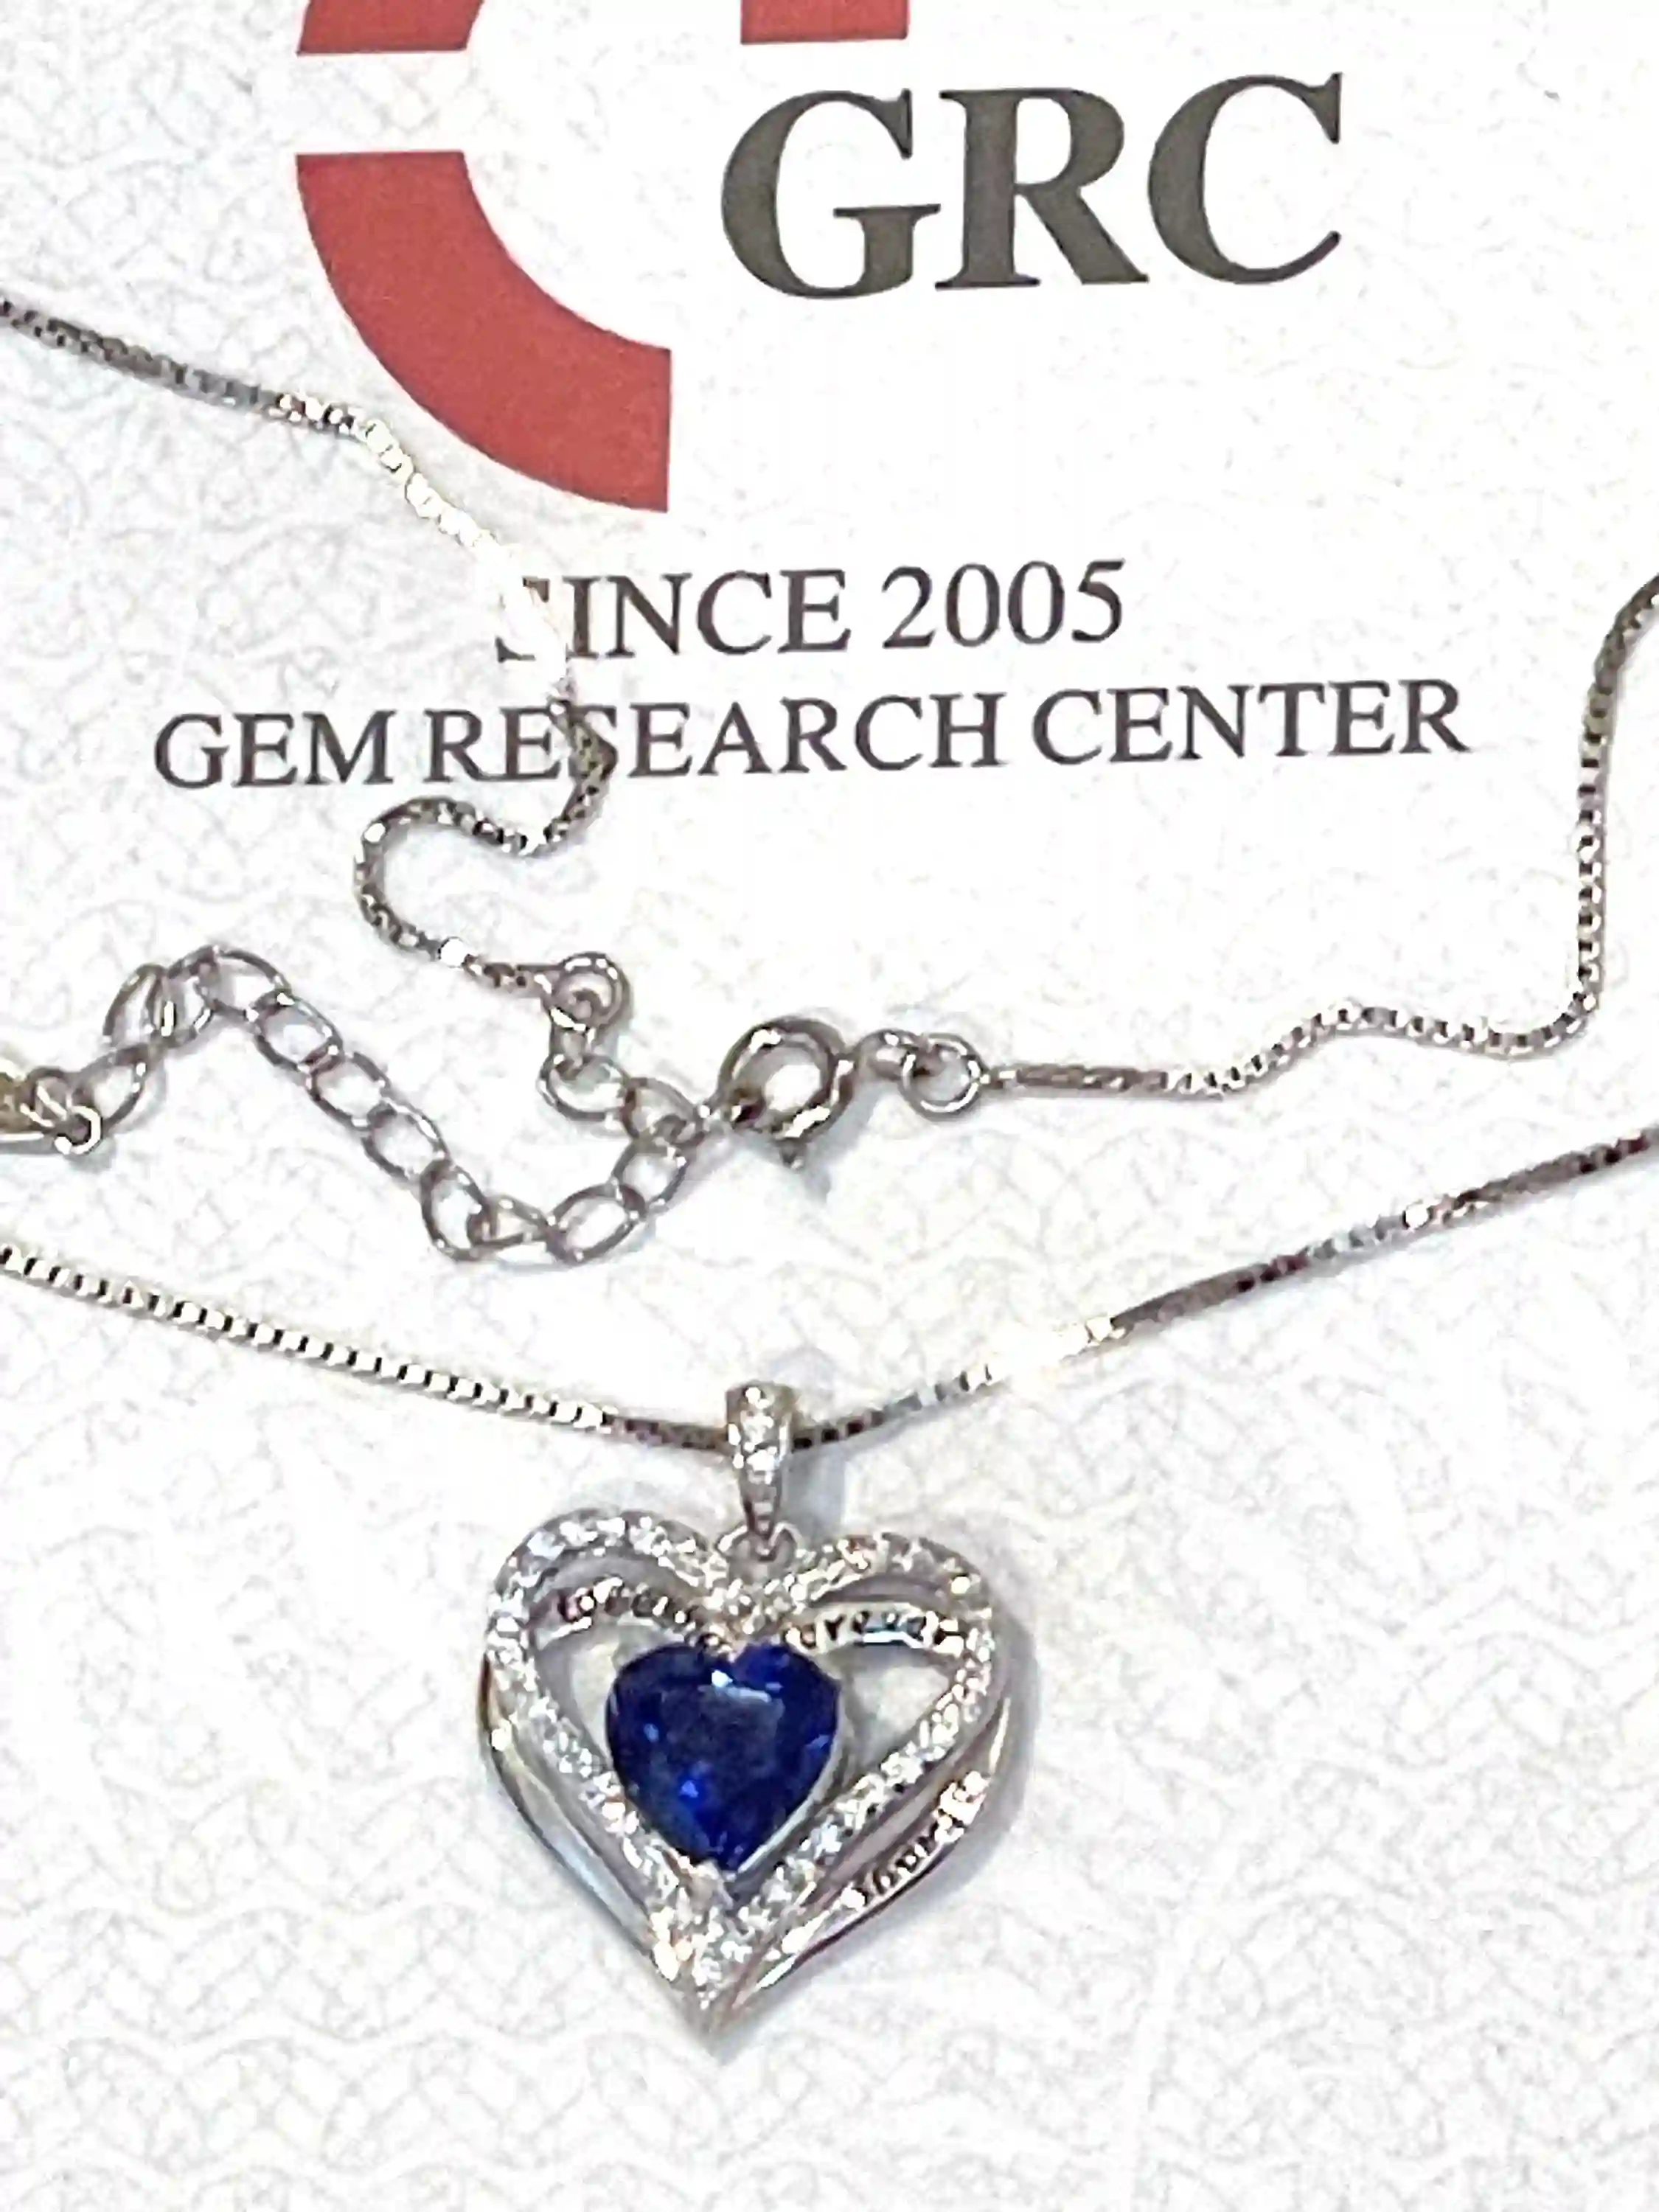 2 ctw CERTIFIED Natural Sapphire Heart Pendant Diamond Necklace Blue Sapphire Heart-cut Sapphire Diamond Necklace Jewelry TOGETHER FOREVER 